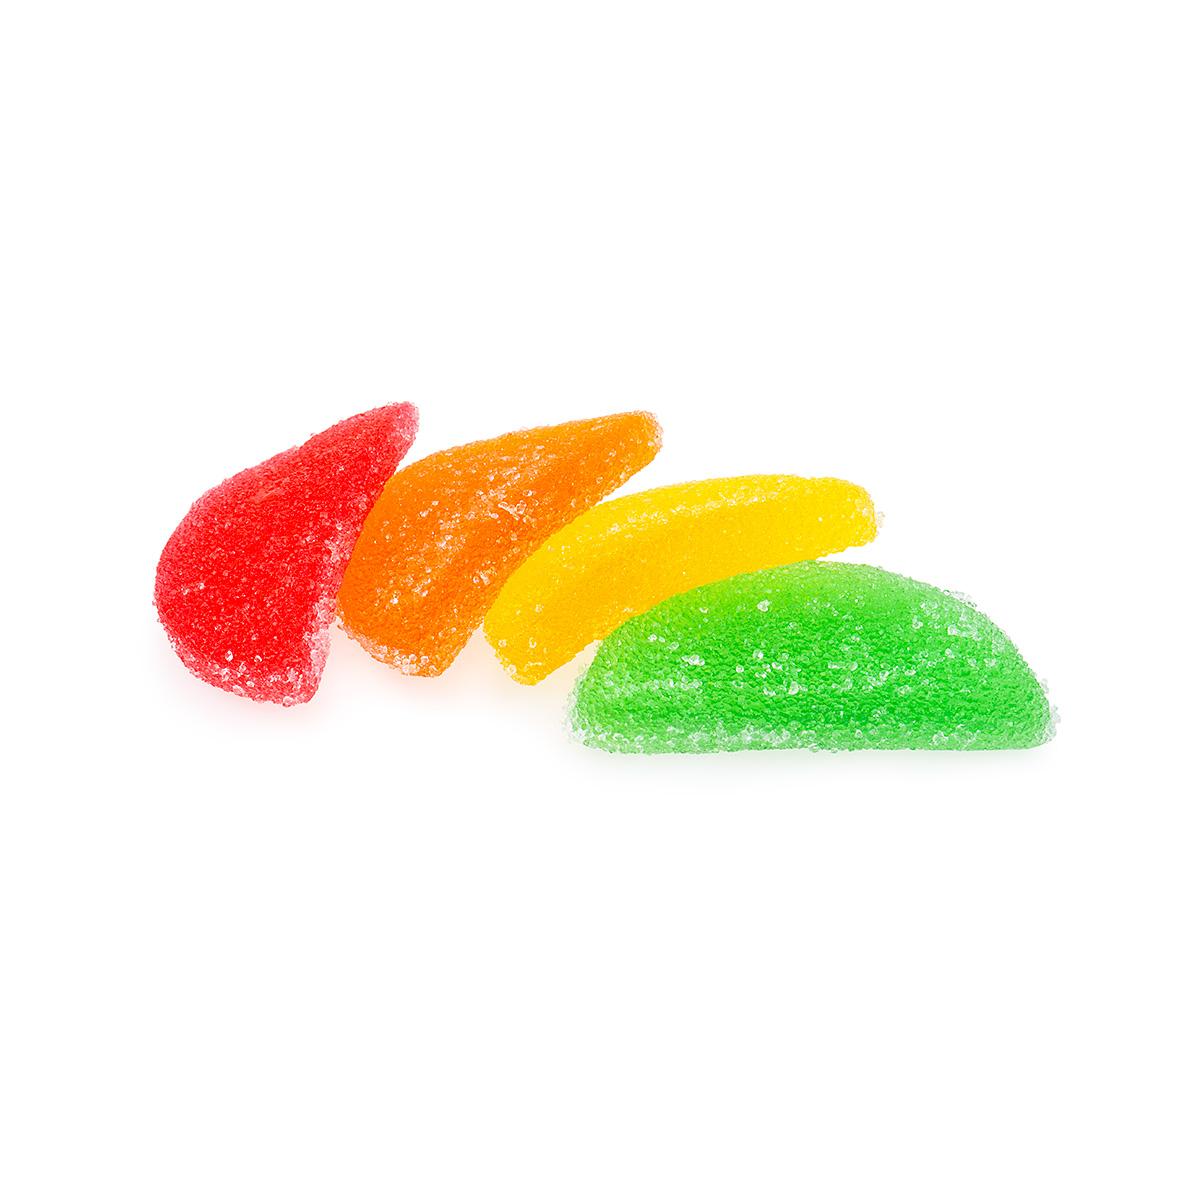  Sugar- Free Wrapped Fruit Slices Candy - 1 Lb.